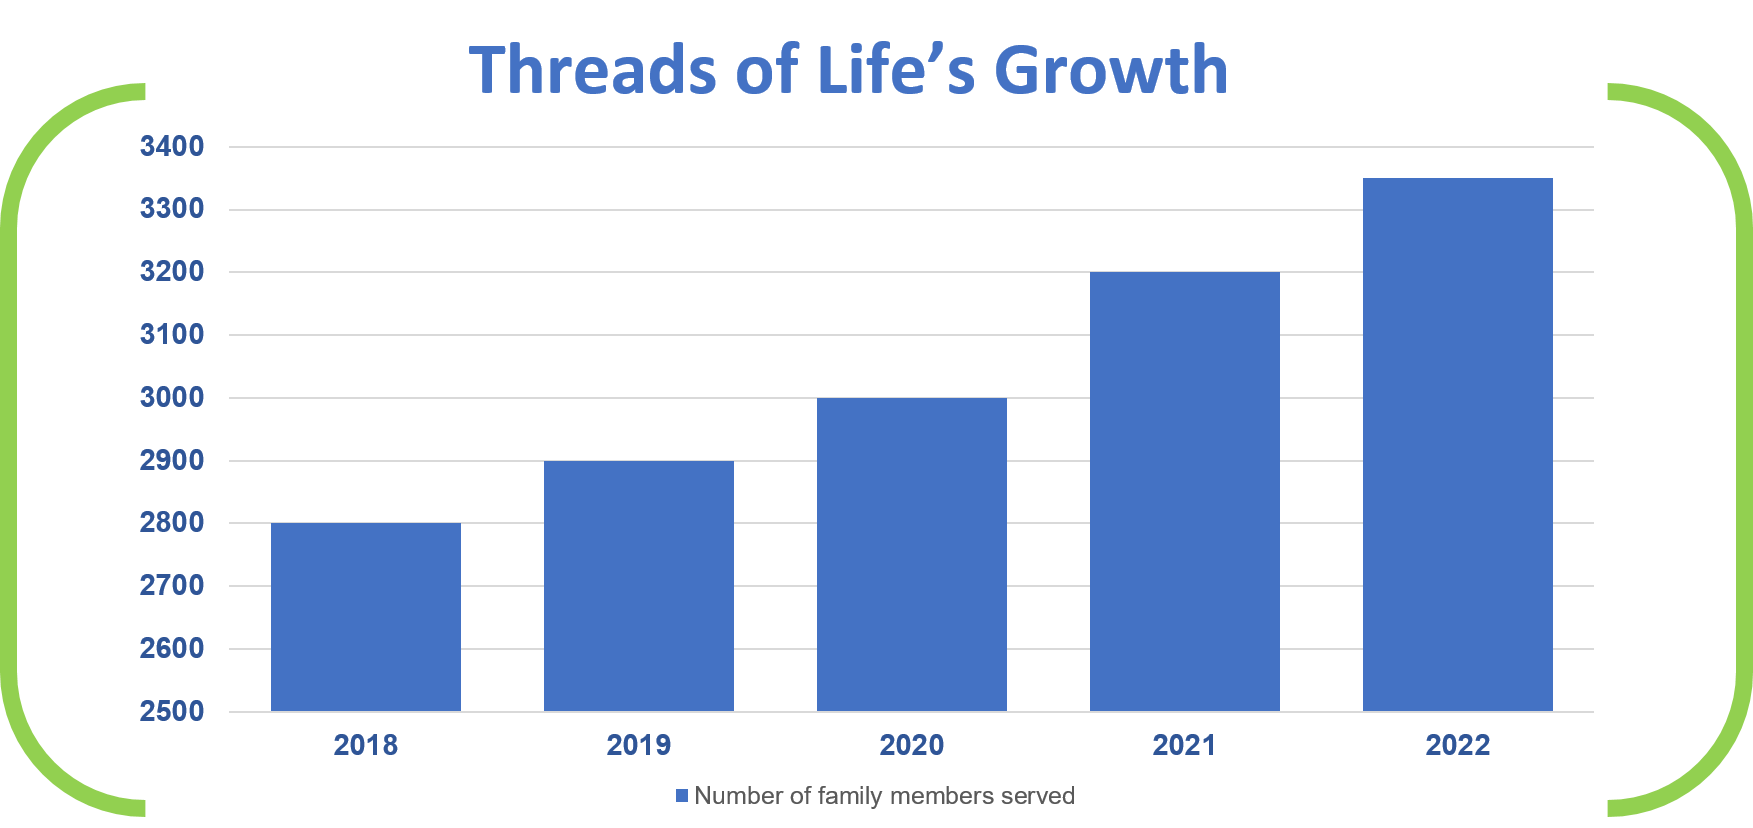 Chart of the growth in the number of family members served each year from 2018 to 2022. Titled "Threads of Life growth", the chart shows an upward trend of more families served each year, with 2022 serving 3,350 family members.